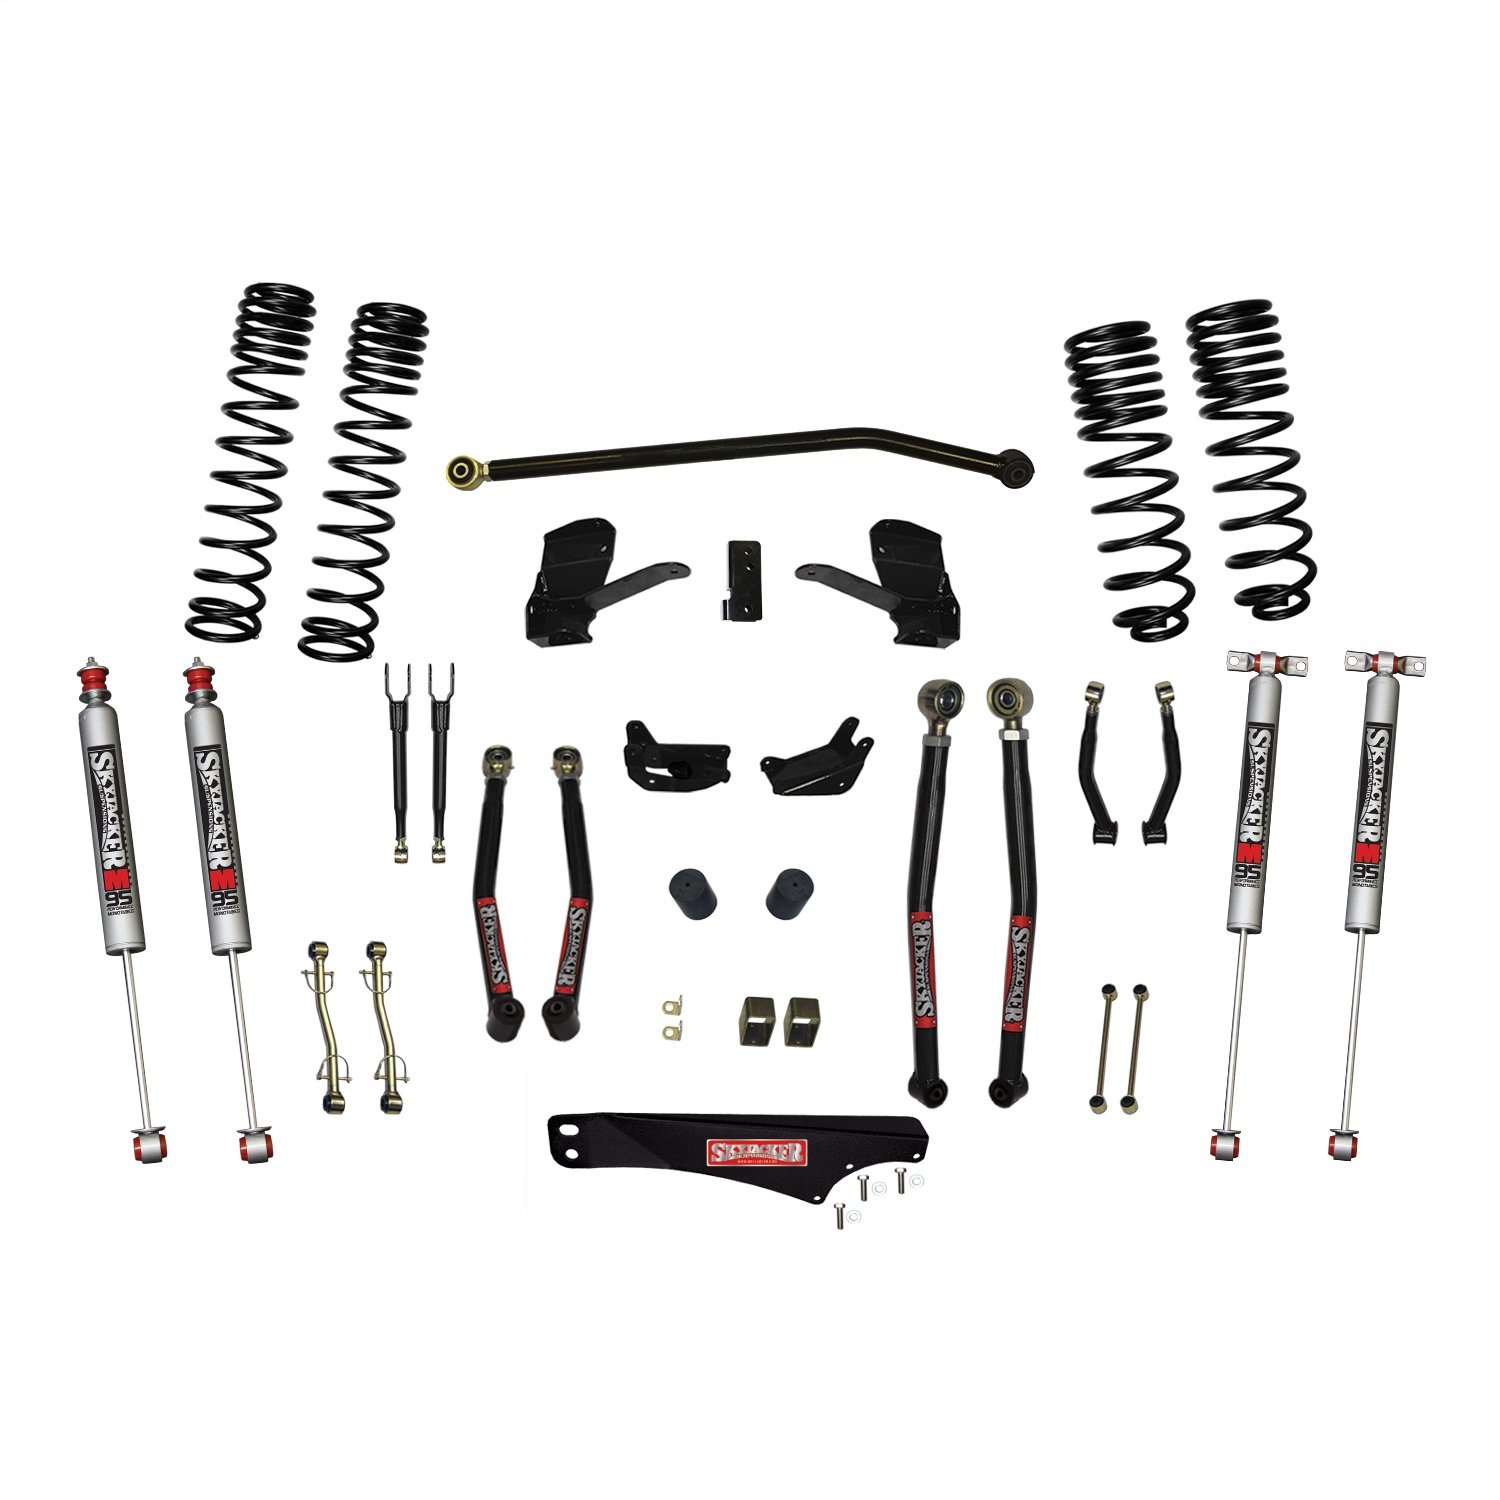 JK40LKLT-SXM Front and Rear Suspension Lift Kit, Lift Amount: 4 in. Front/4 in. Rear